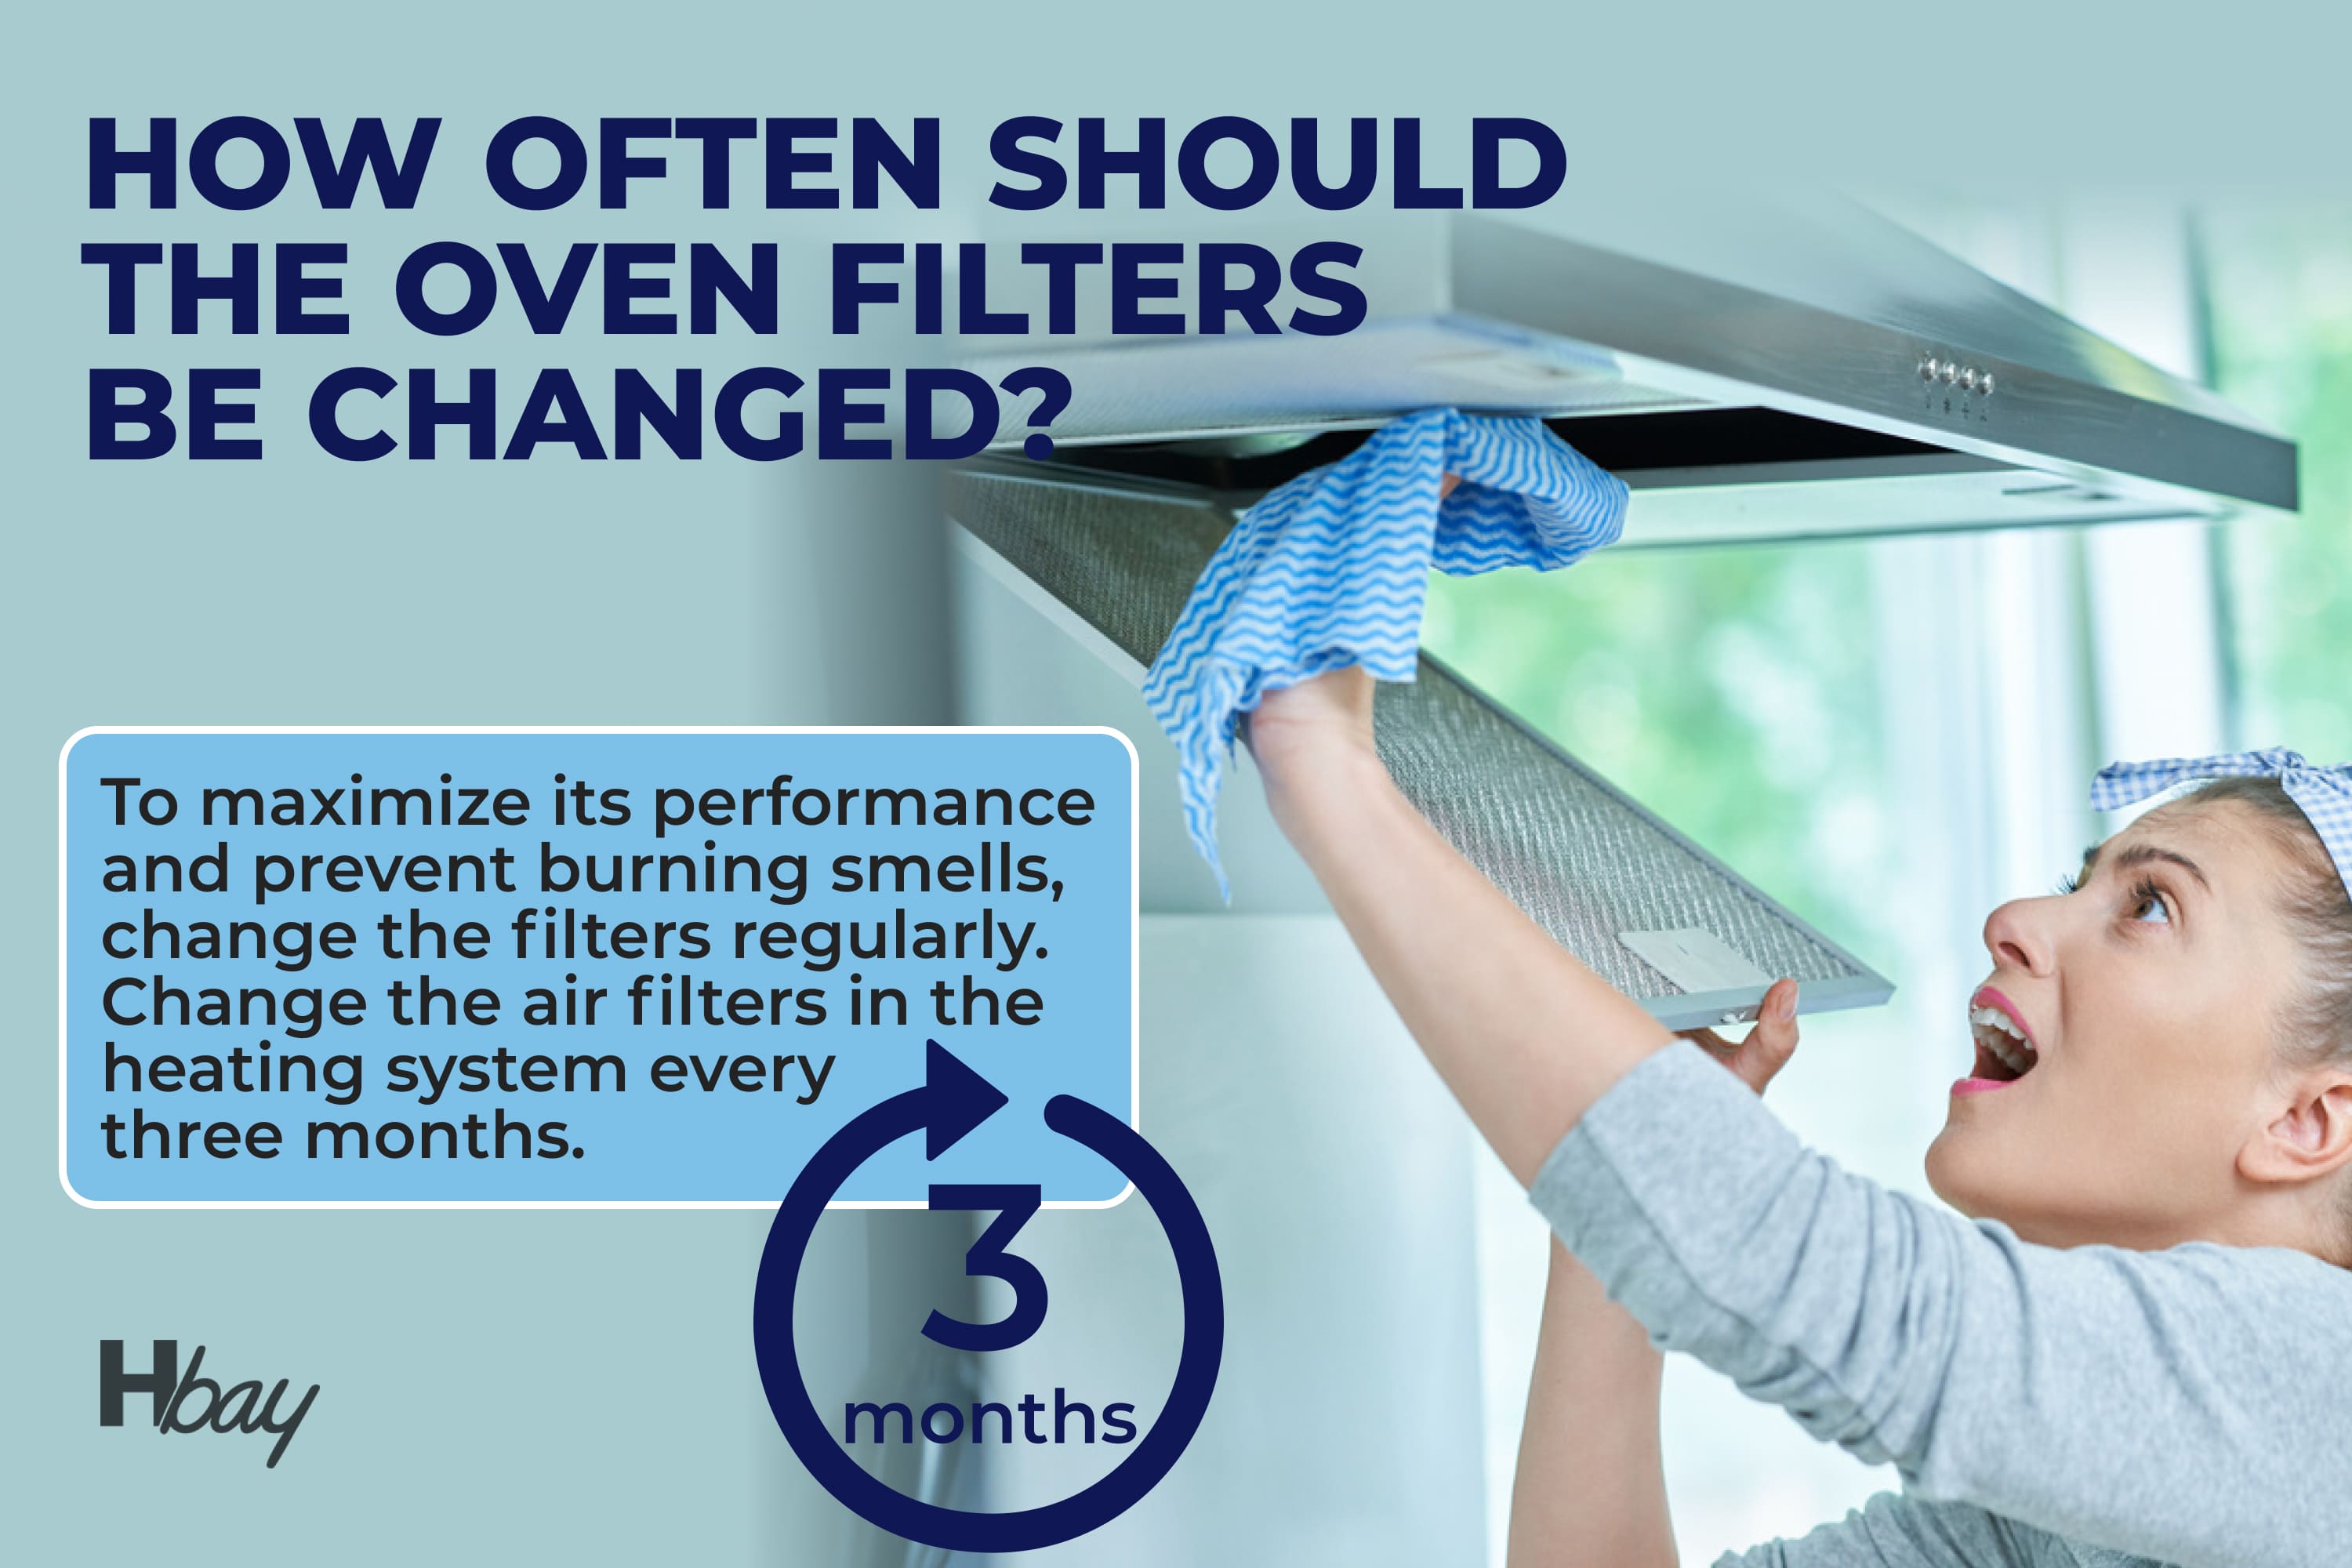 How often should the oven filters be changed